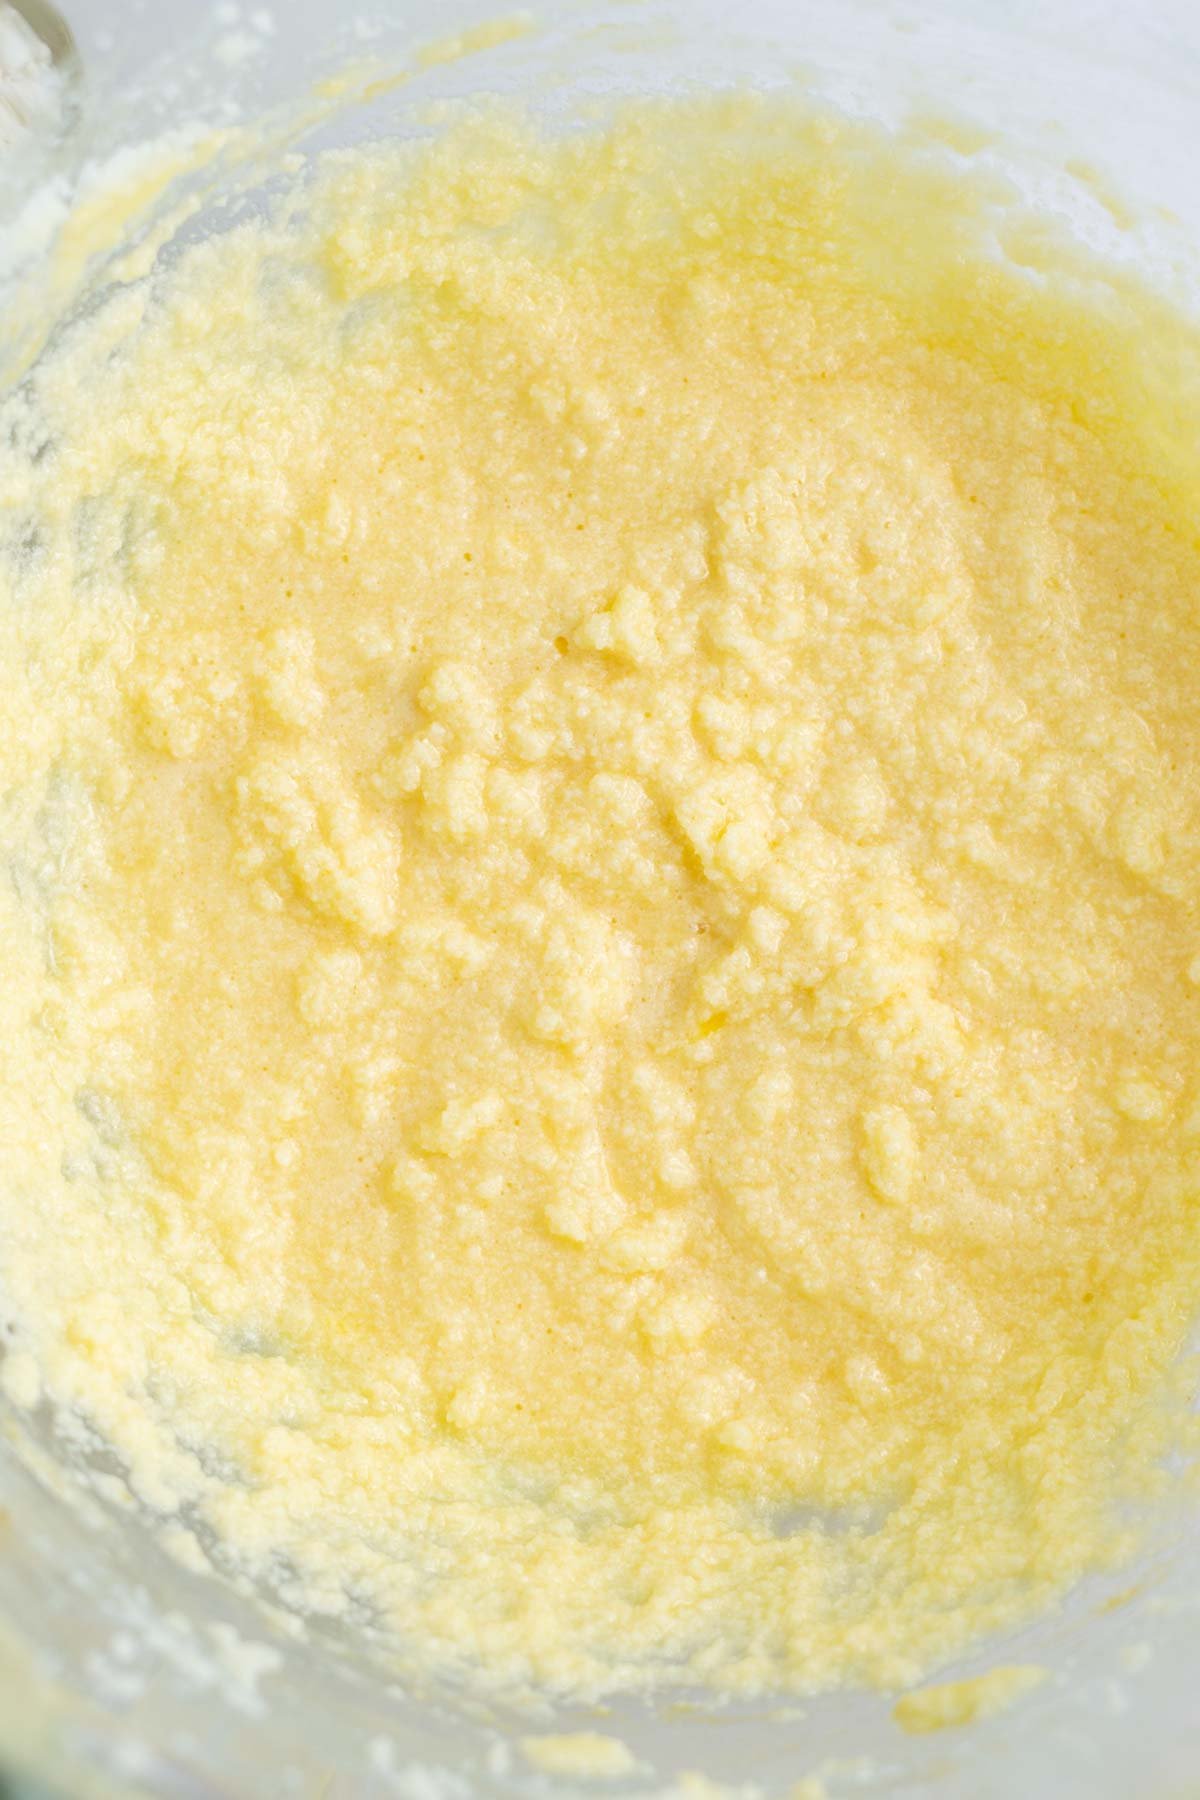 cardamom cake batter looking curdled after eggs and sour cream added